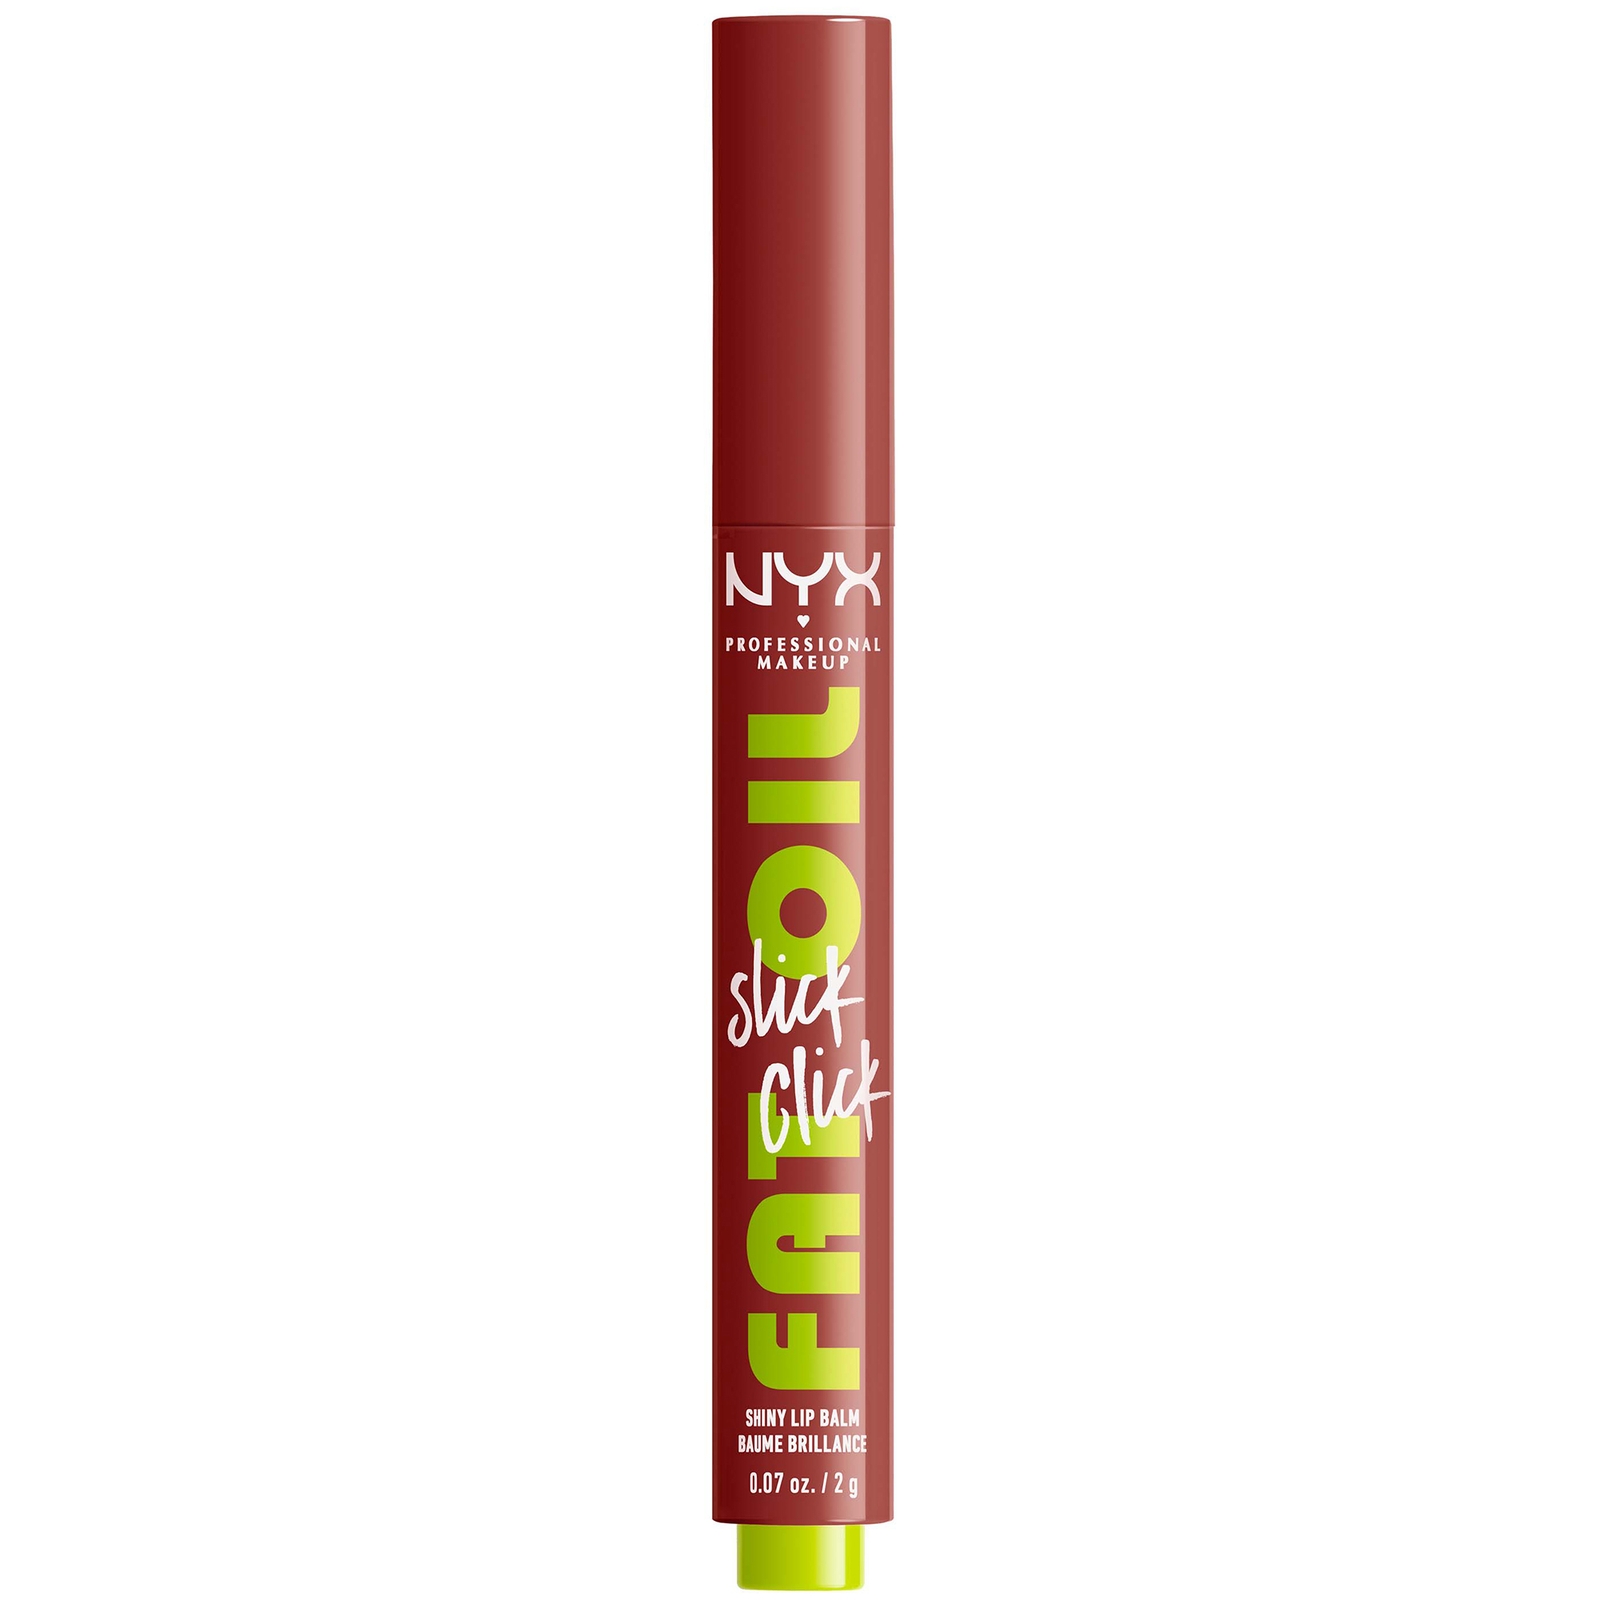 Nyx Professional Makeup Fat Oil Slick Click Lip Balm 2ml (various Shades) - Going Viral In White